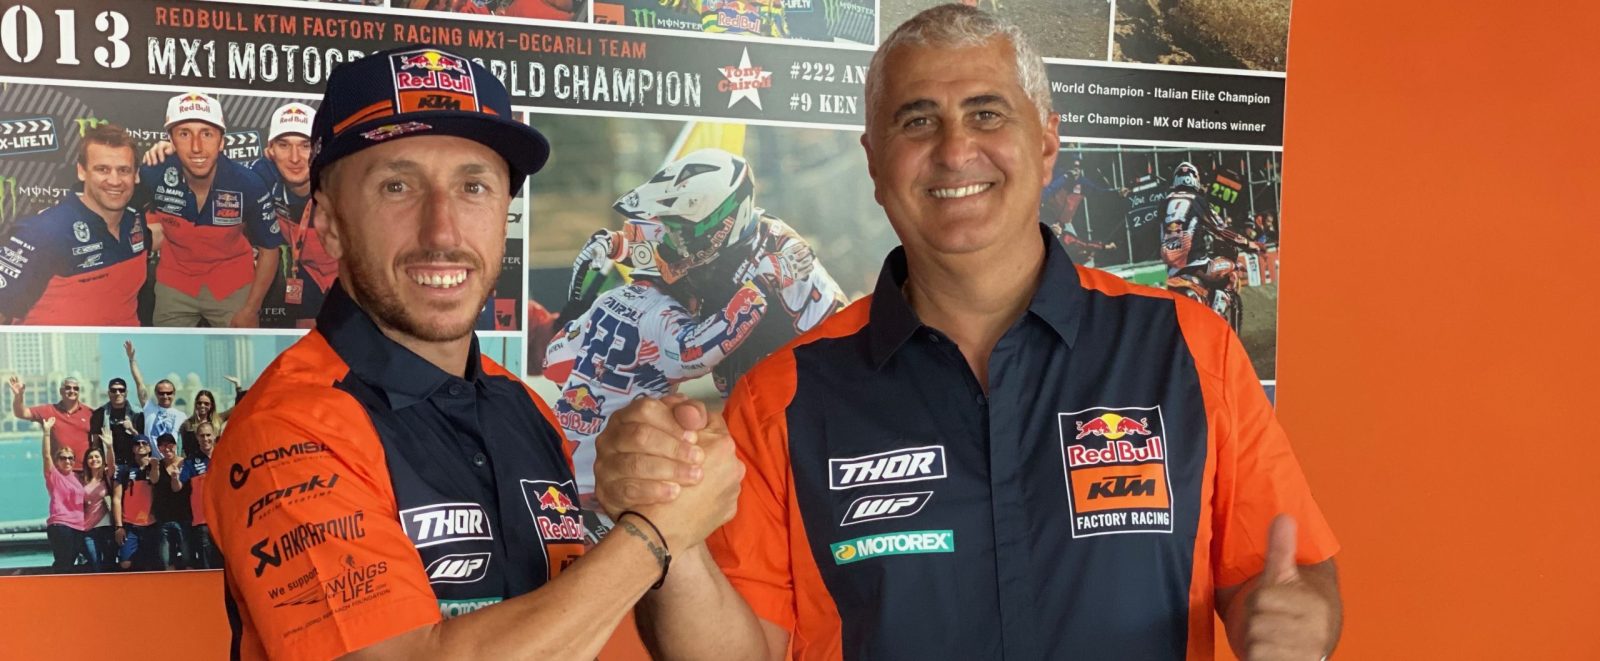 Tony Cairoli signs for 2021 with Red Bull Factory KTM